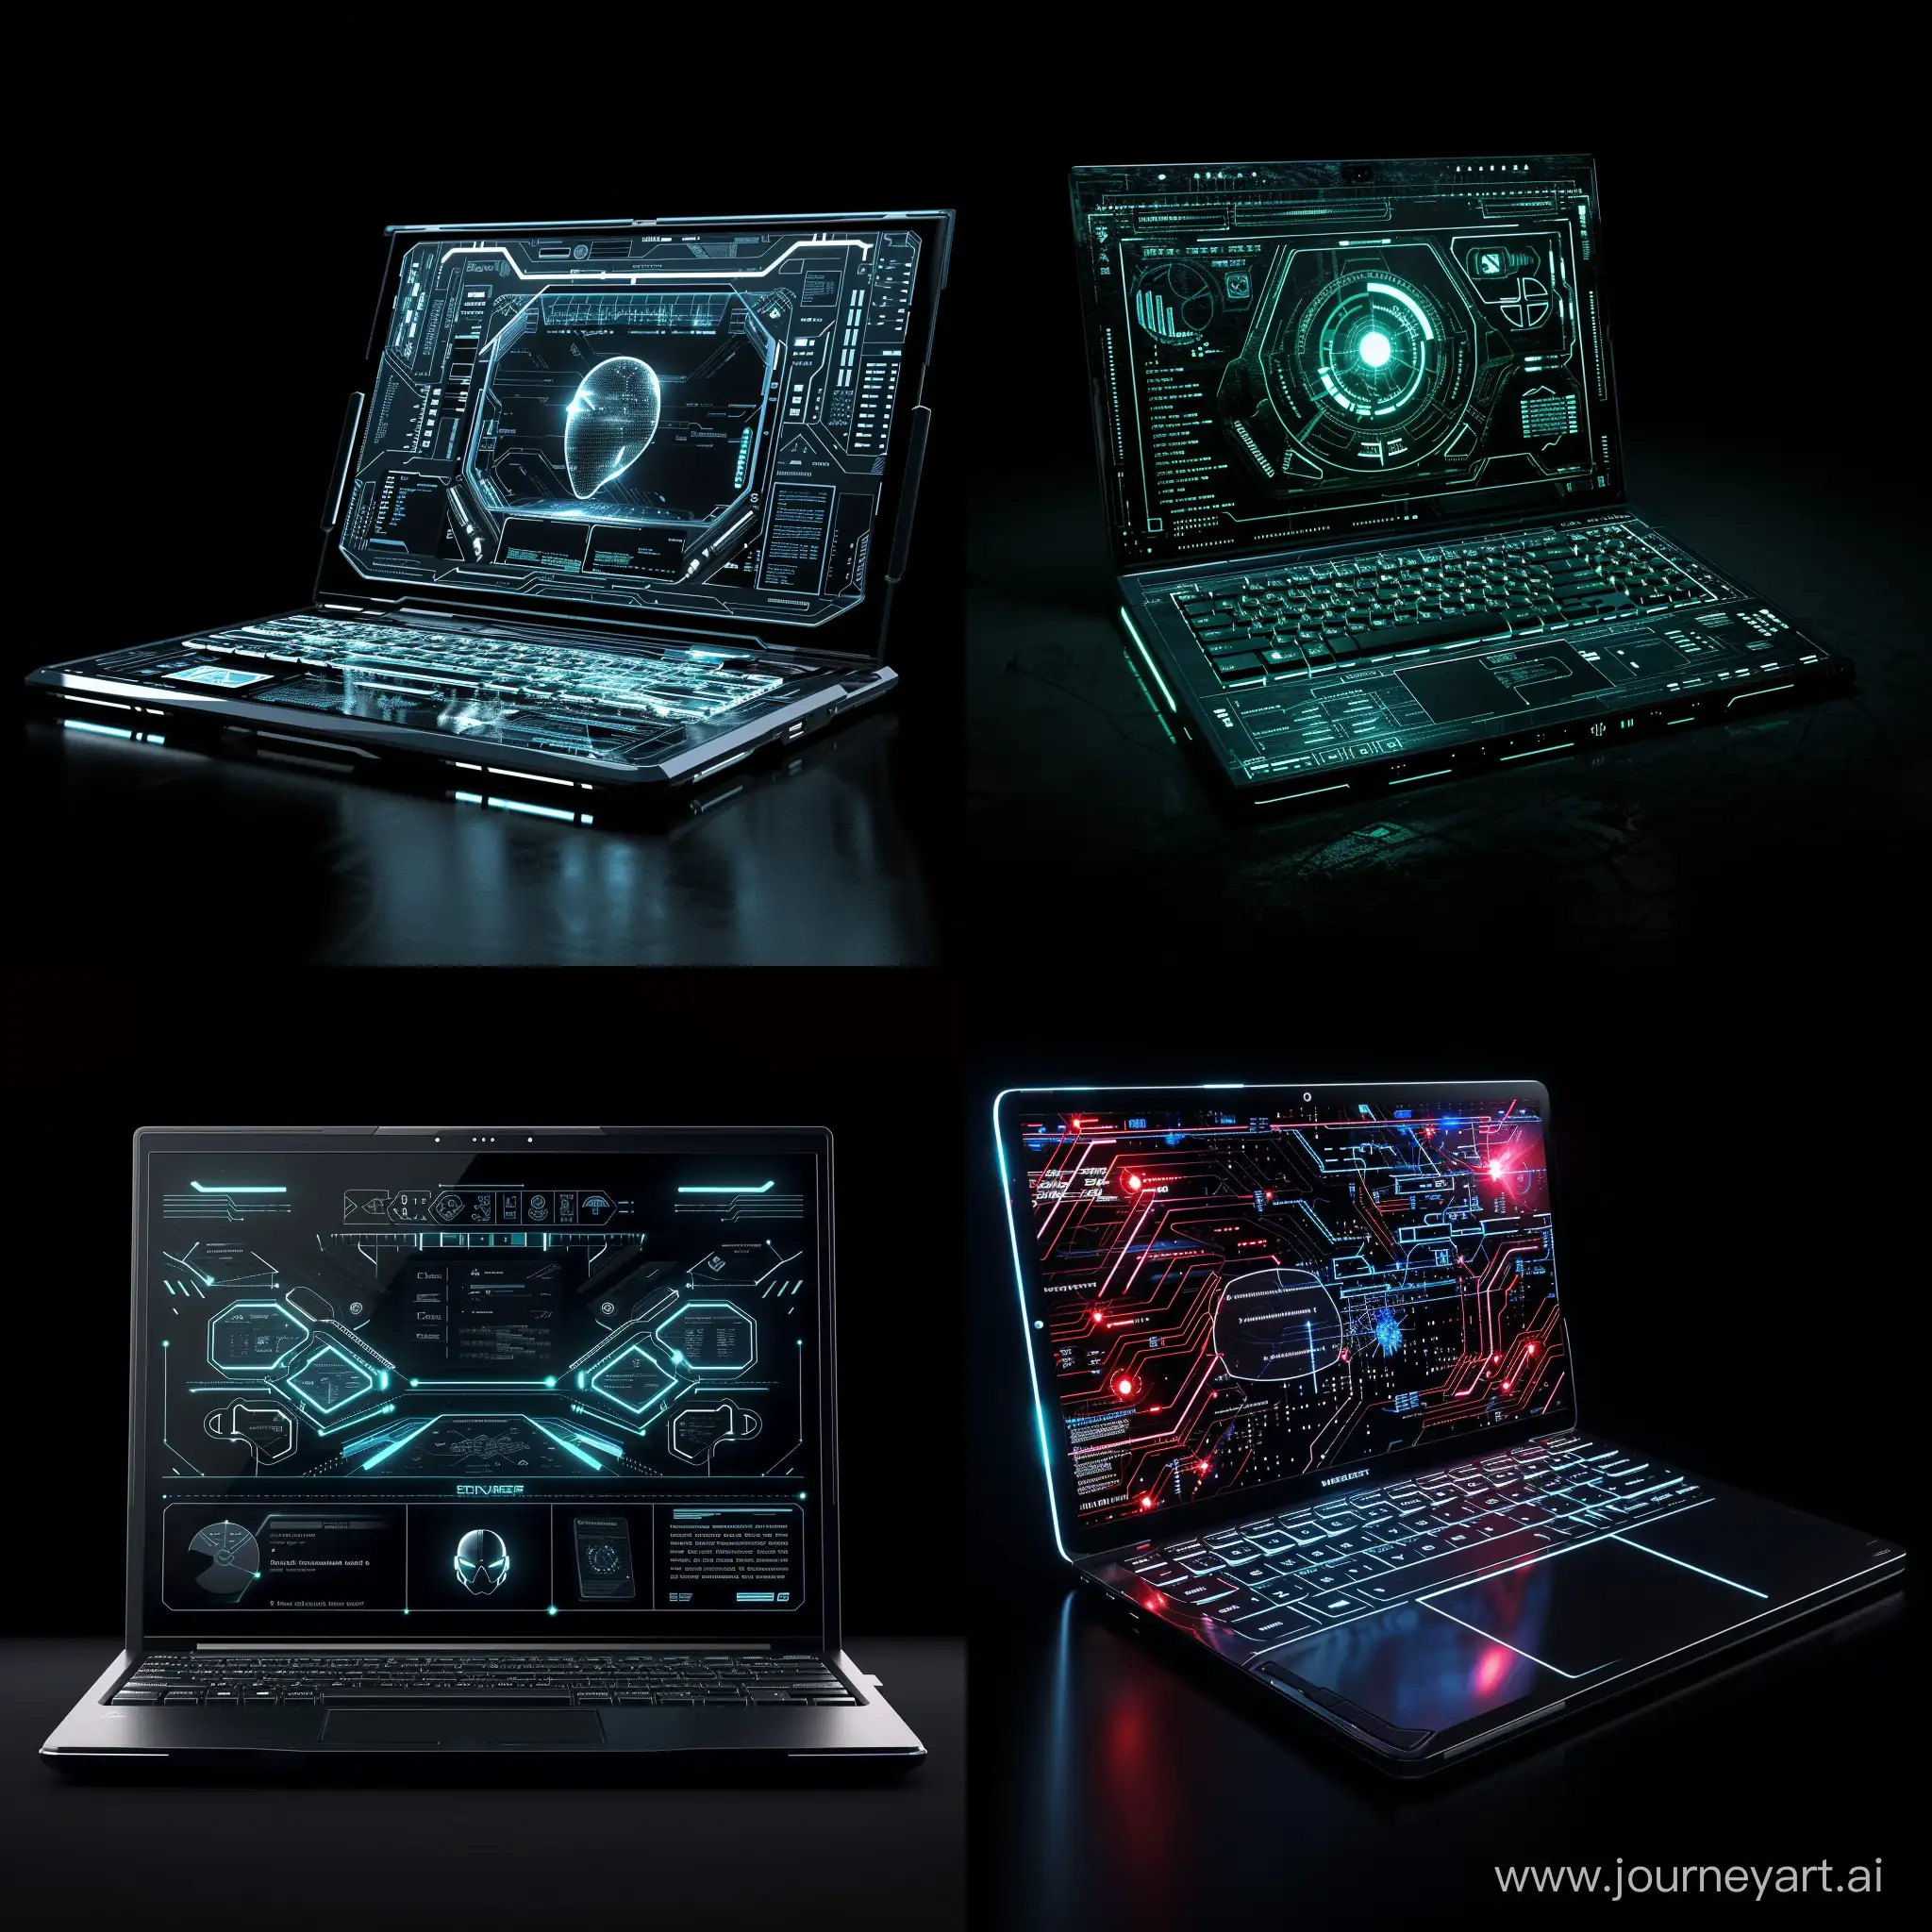 Futuristic-Cyber-Noir-Laptop-in-Cinematic-Style